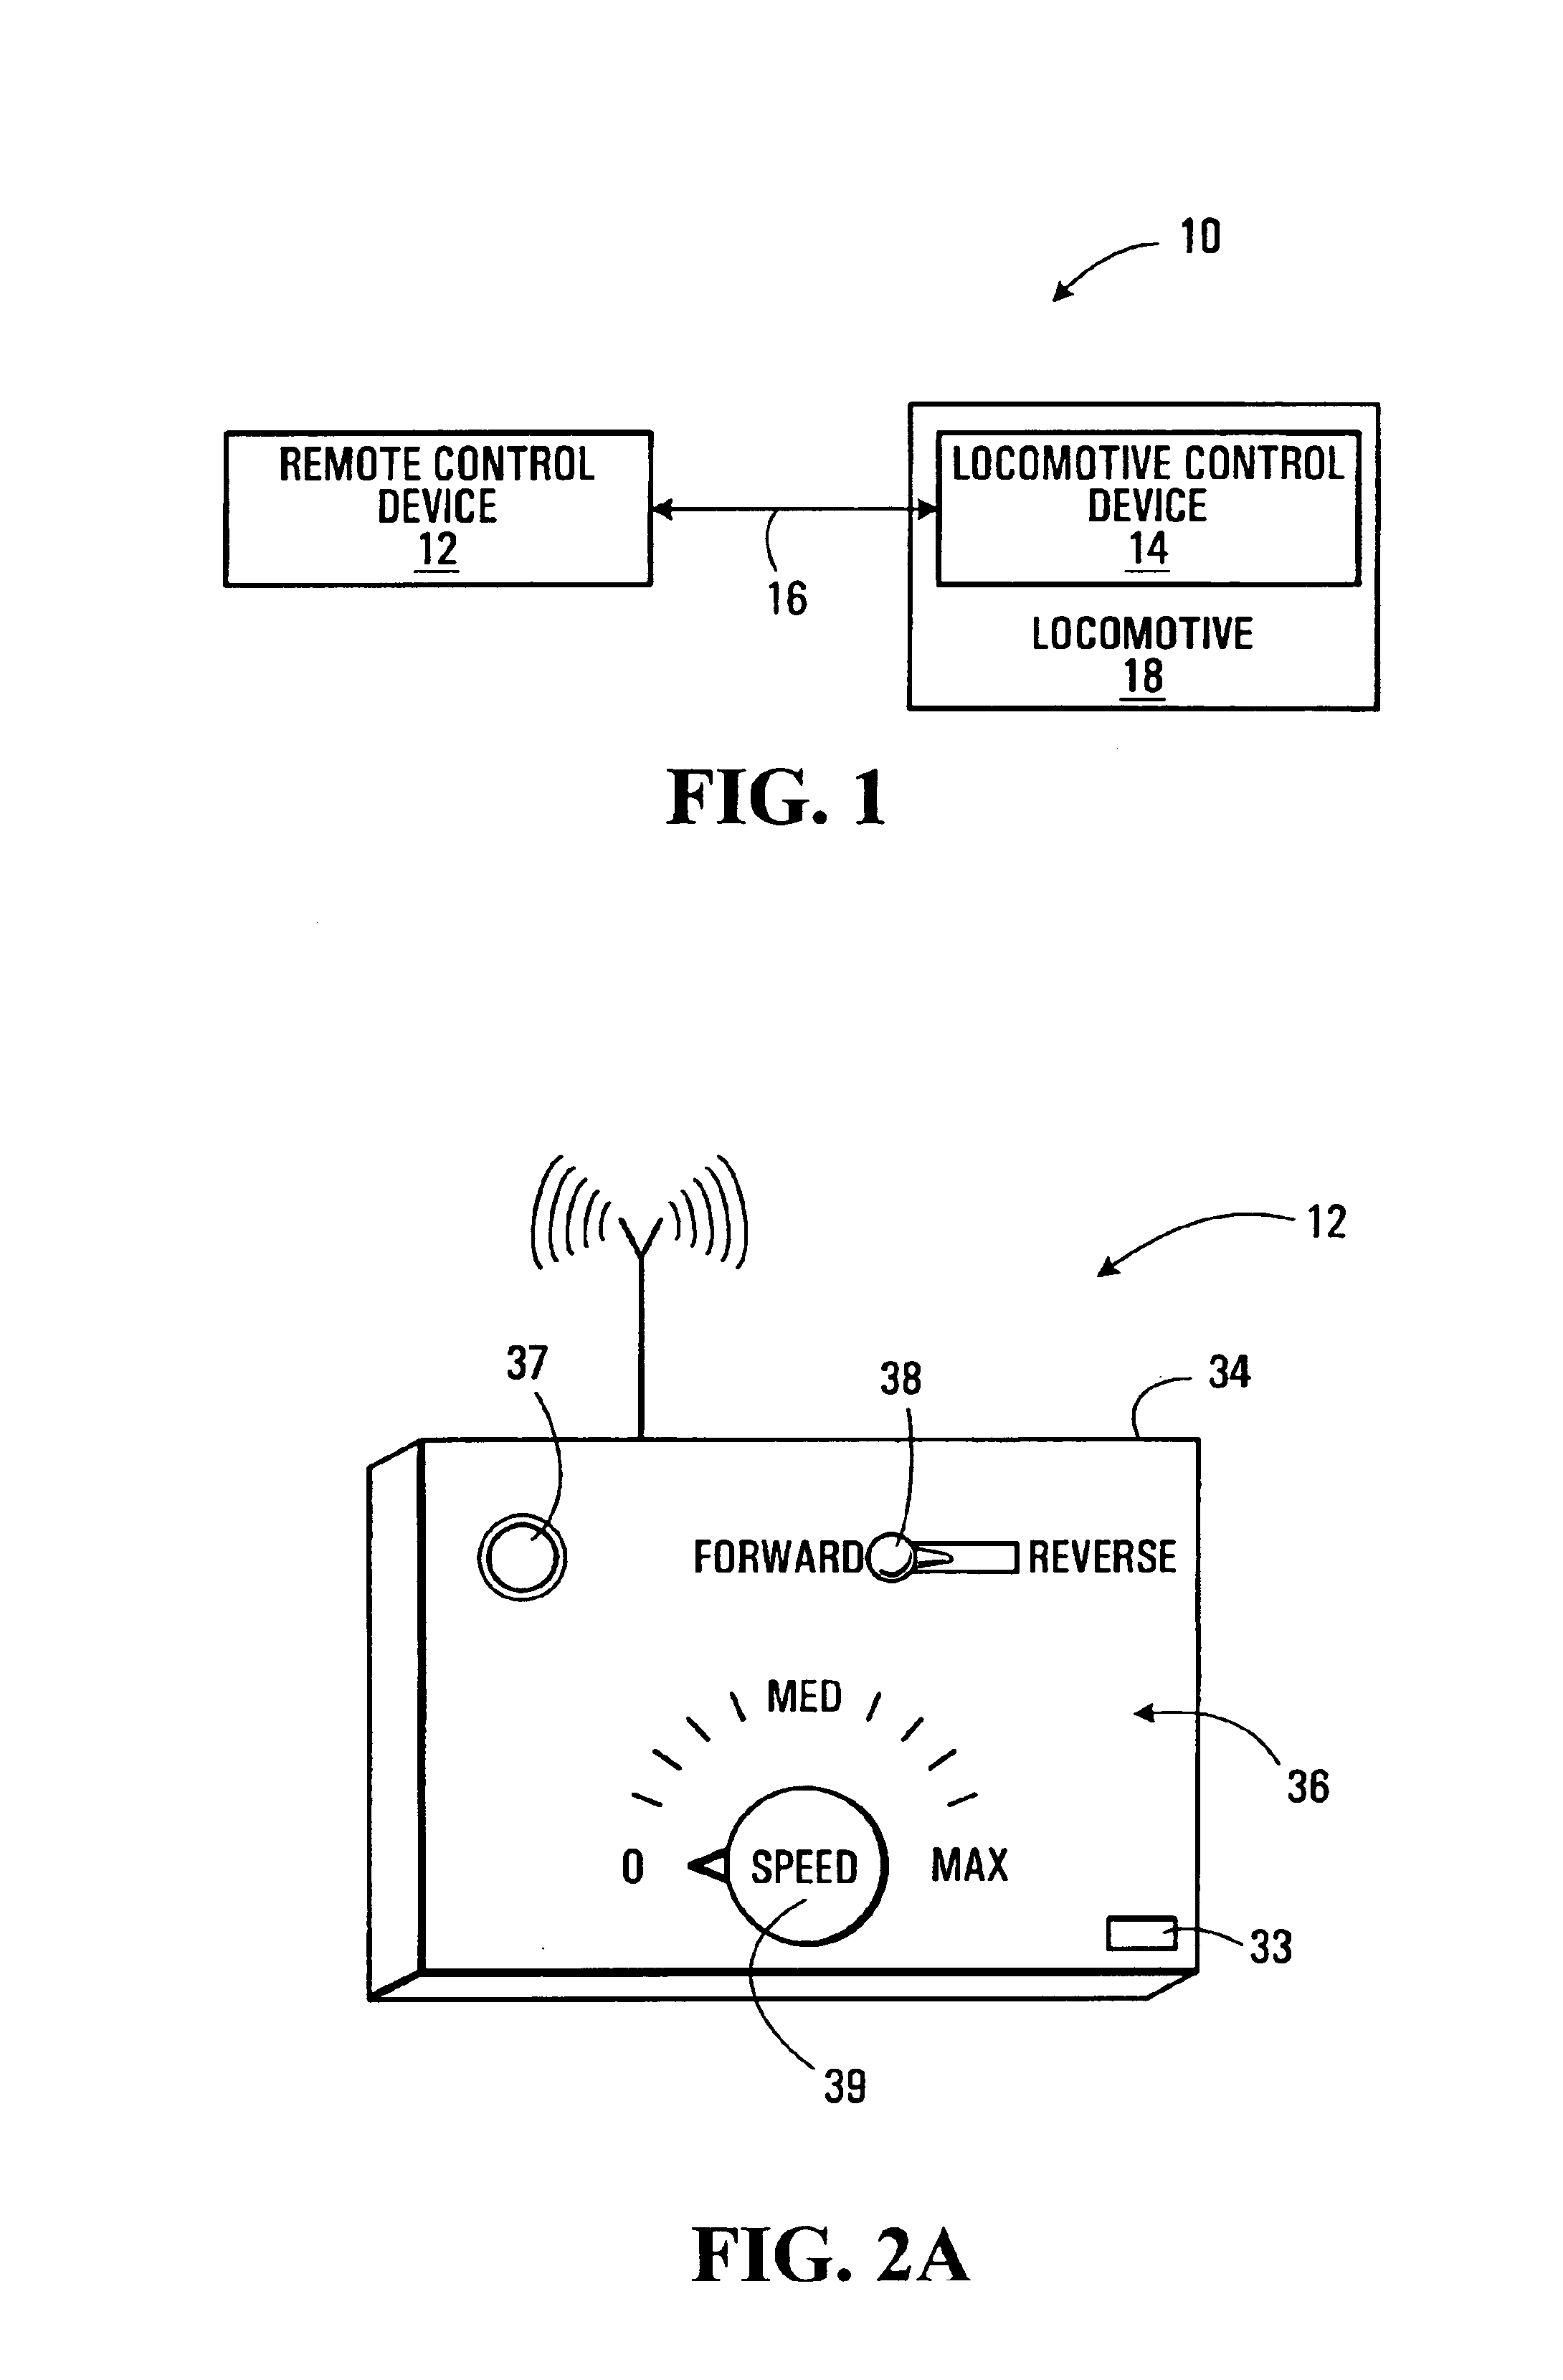 Programmable remote control system and apparatus for a locomotive